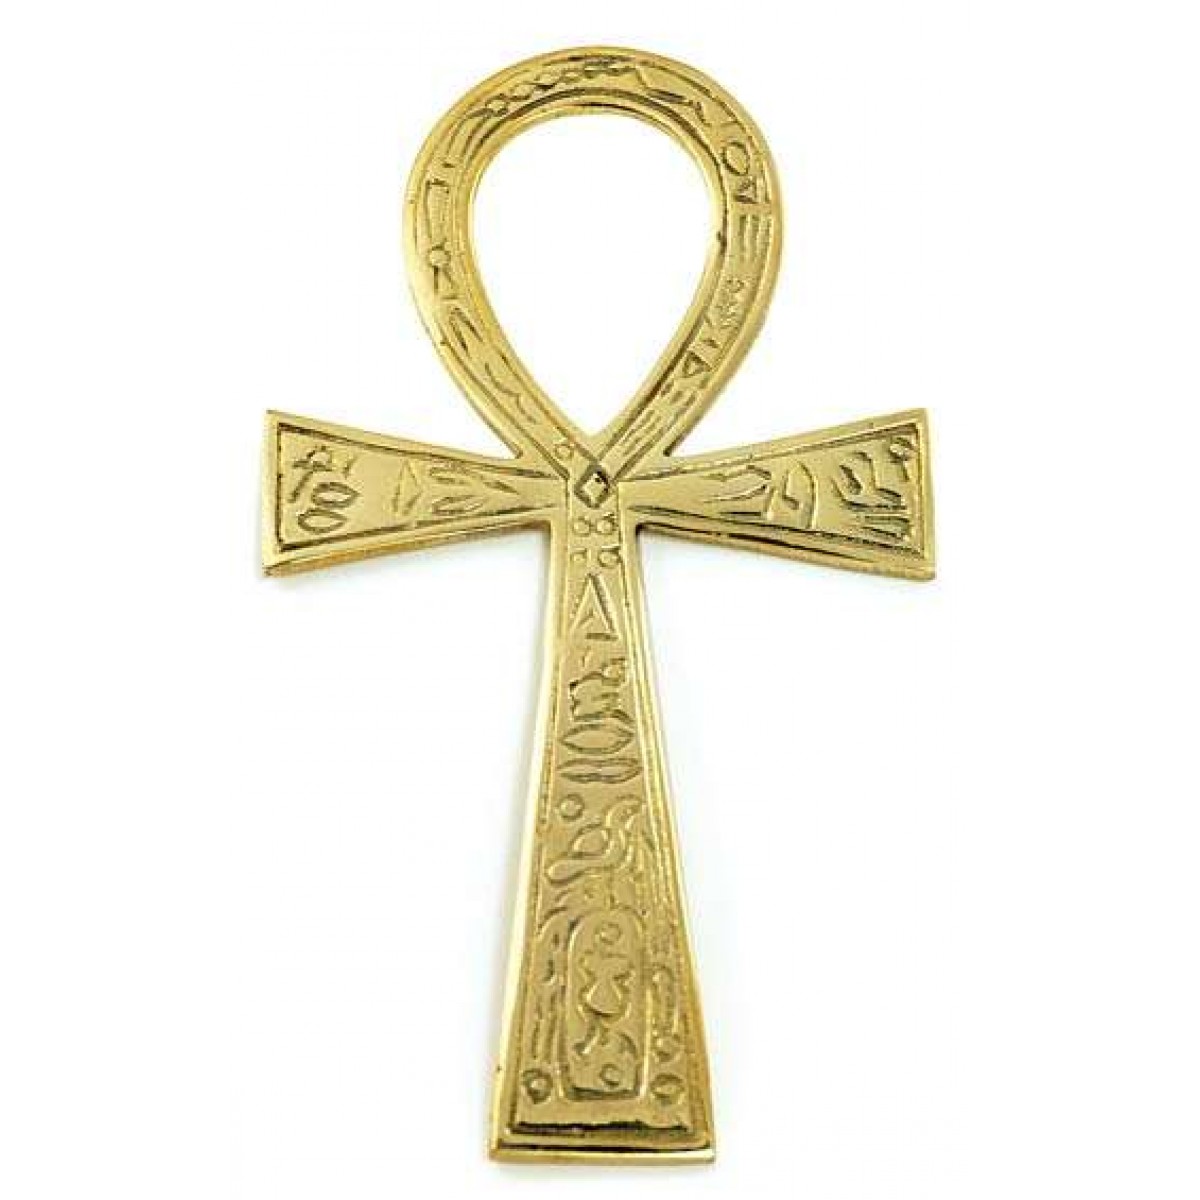 Large Brass Engraved Egyptian Ankh 3.5 x 6.5 Inches - Double Sided Ankh